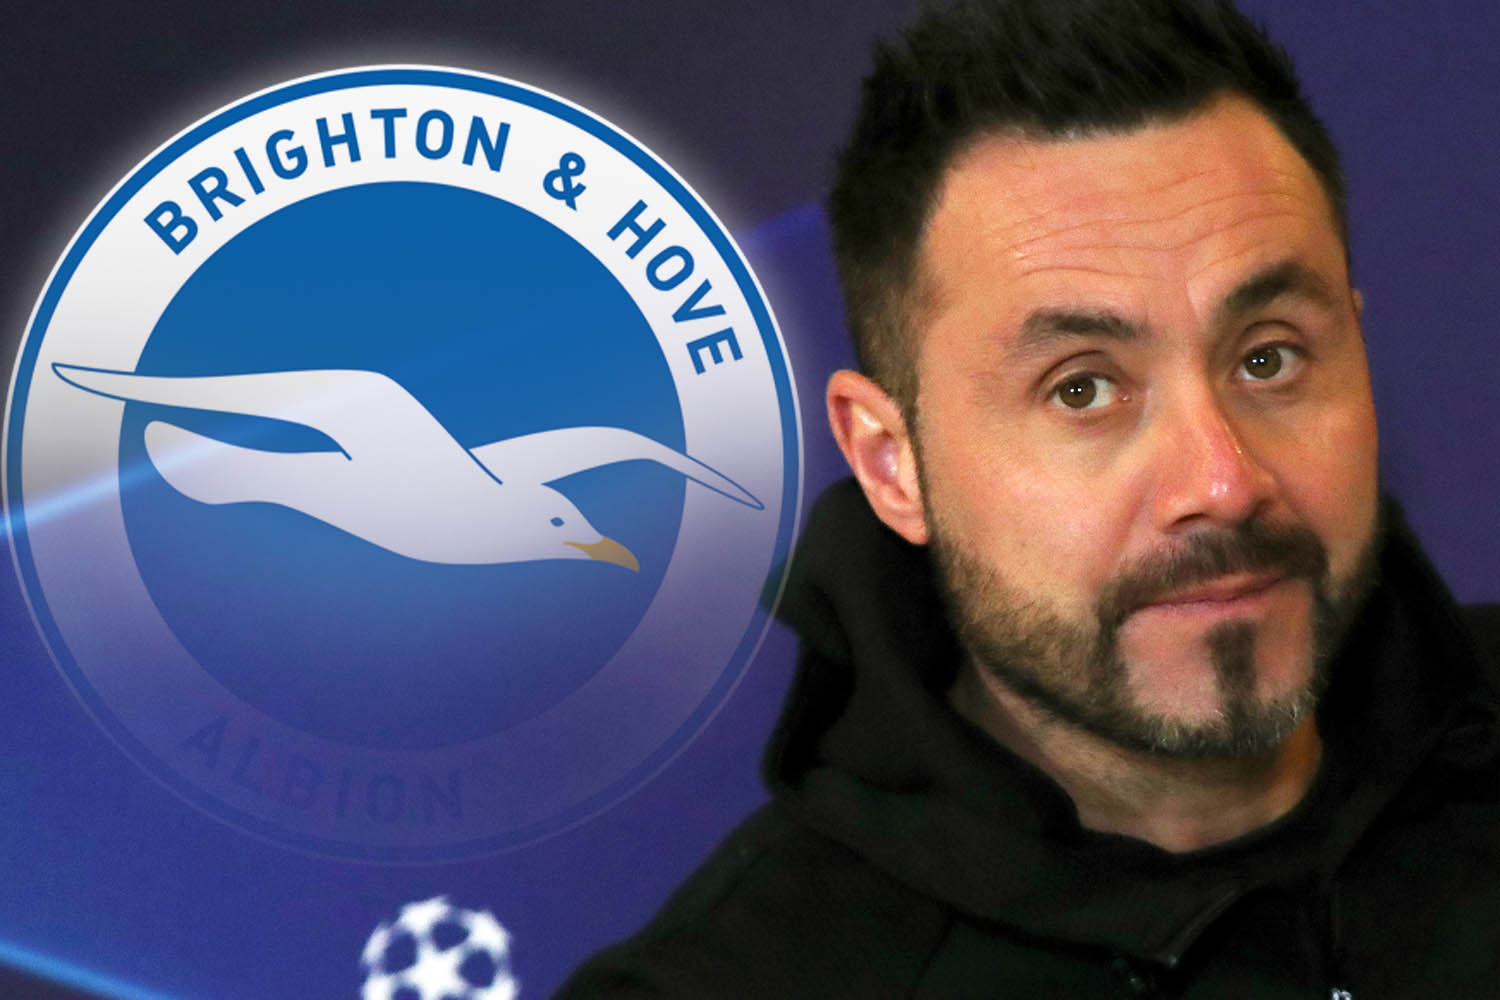 According to BBC report: Brighton head coach has some important decisions to make ahead of their clash with Aston Villa at 12.30pm tomorrow….